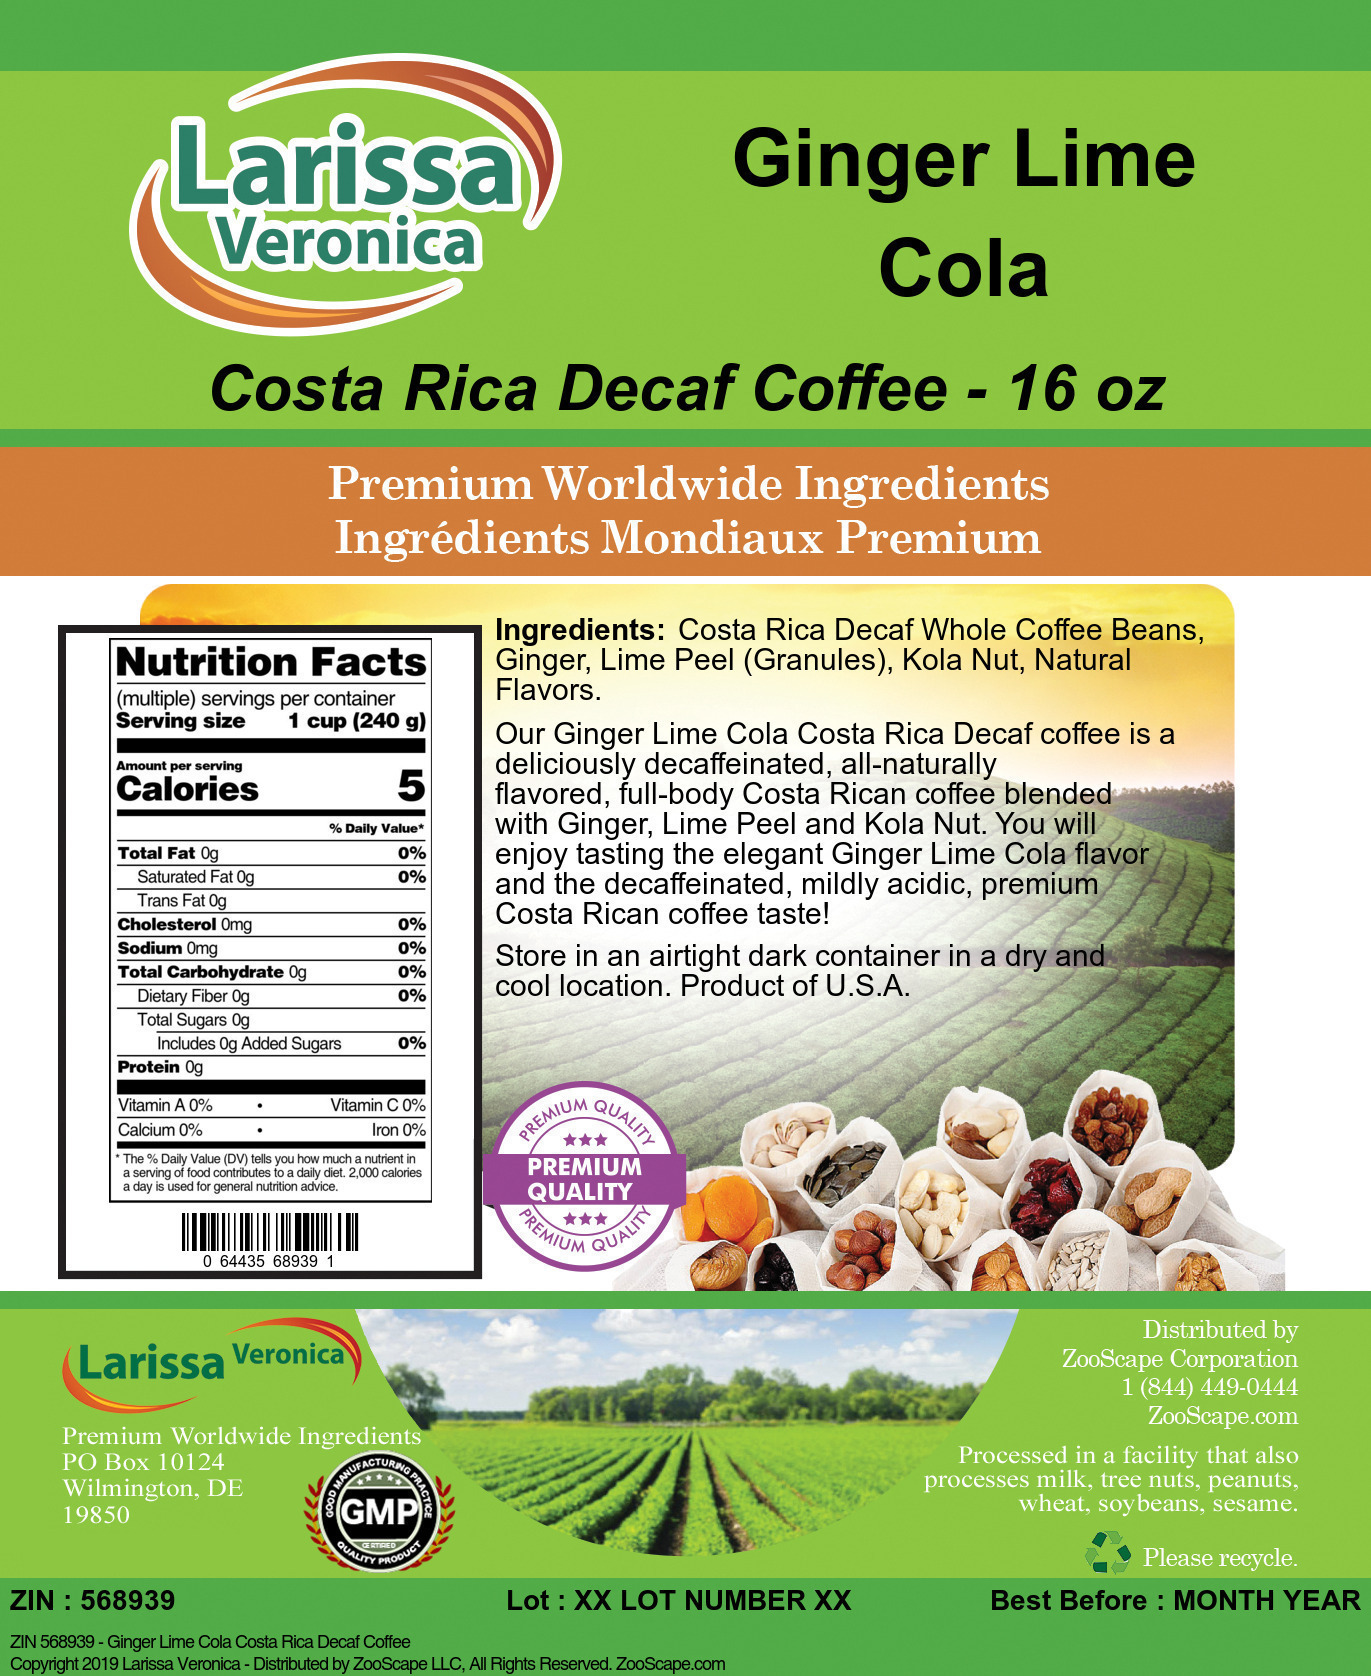 Ginger Lime Cola Costa Rica Decaf Coffee - Label